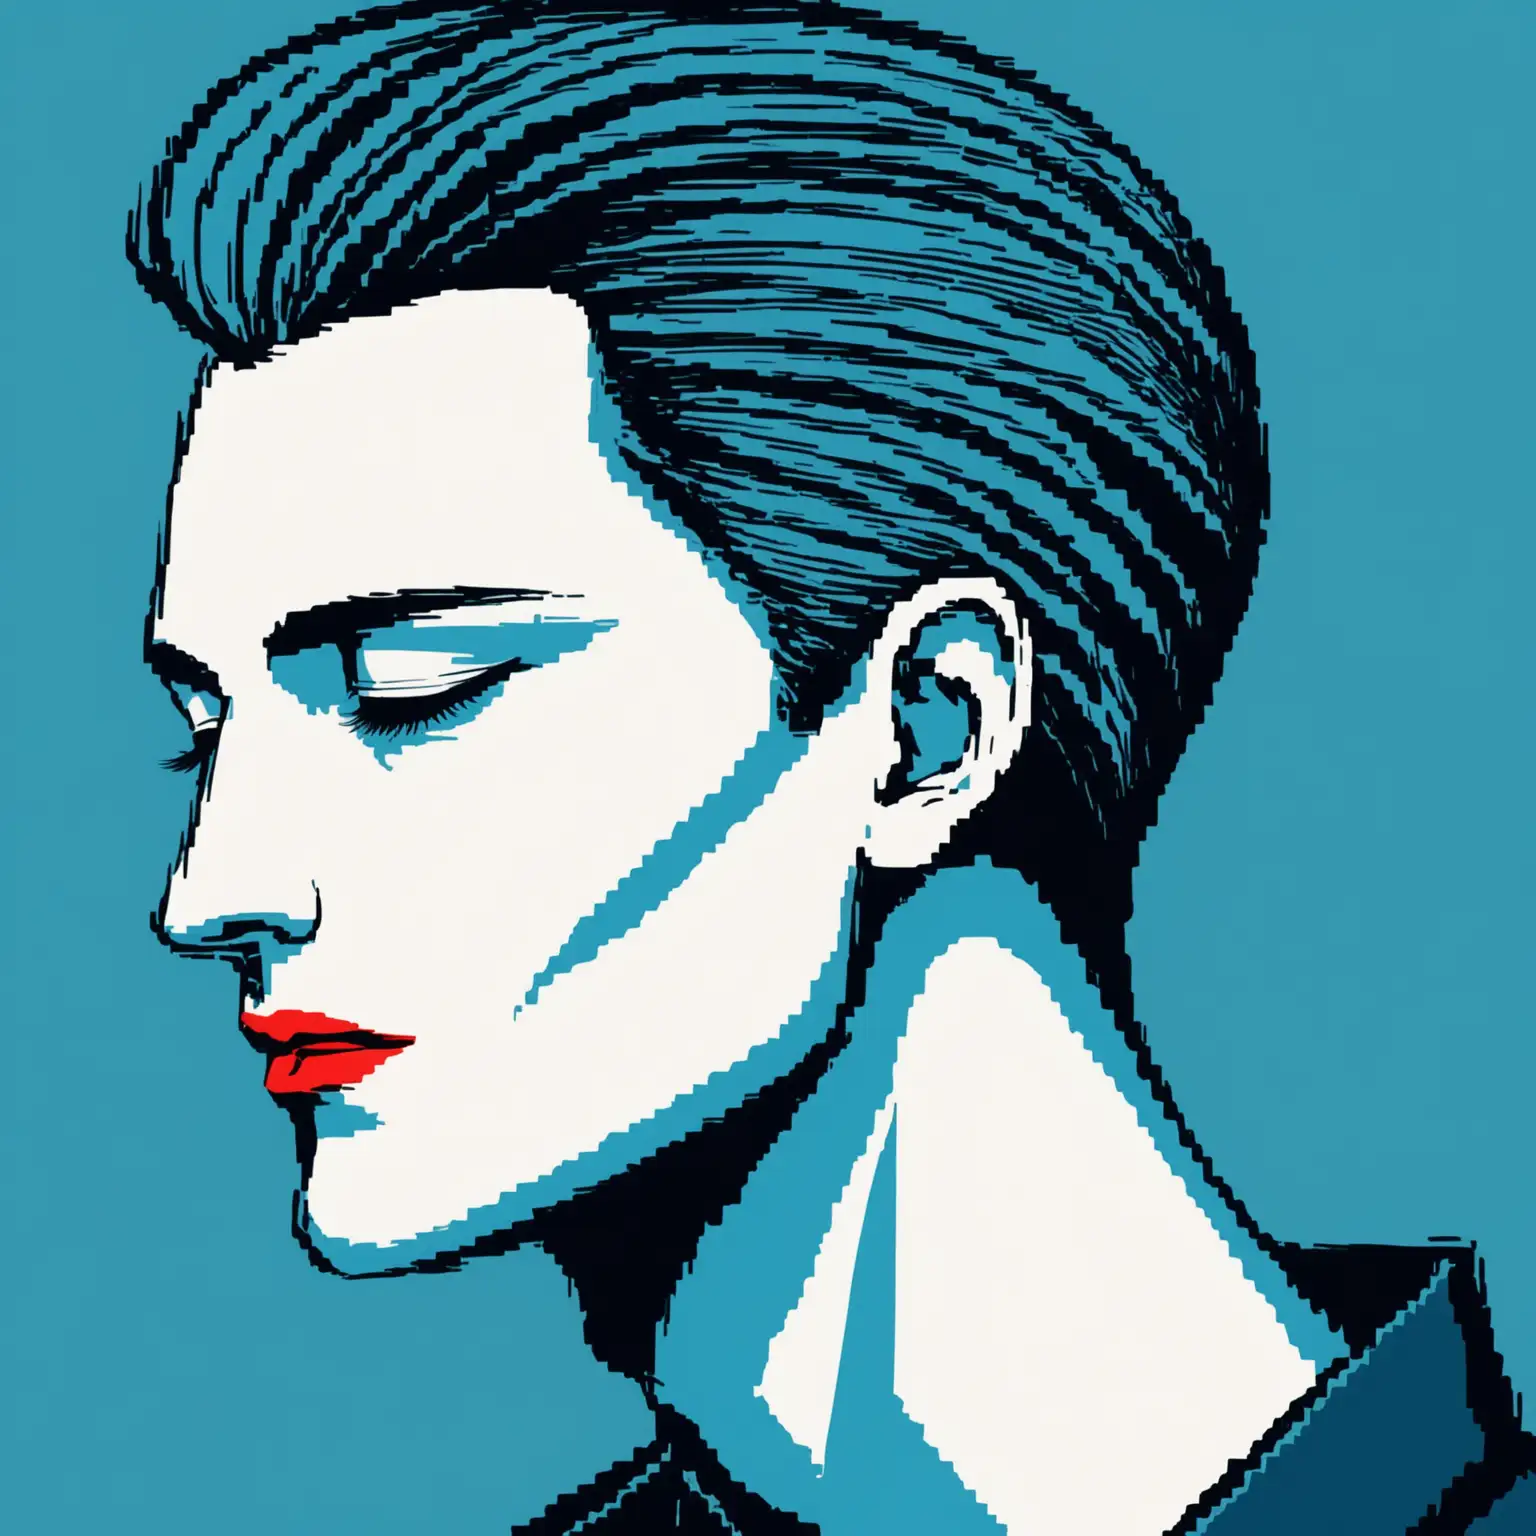 A modern, minimalist vector art portrait of a man in profile, facing left. The artwork uses a limited color palette primarily consisting of shades of blue, along with white and red accents. The man's face is composed of smooth, geometric shapes and bold lines, giving the image a clean and stylized appearance.

His skin is rendered in varying shades of blue, creating a sense of depth and contour. The darkest blue outlines the shape of his head and neck, while lighter blues are used to define the facial features. Highlights are added with white, accentuating the curvature of his forehead, nose, cheek, and chin.

His hair is a deep, solid navy blue, flowing smoothly and framing his face with a large, sweeping curve that contrasts with the lighter blue background. The hair's simplicity in design adds to the overall minimalist aesthetic.

The woman's eye is closed, with a simple black line defining the eyelid and a small, curved line for the eyelashes. His eyebrows are also depicted with a bold black line, adding definition to her serene expression.

His lips are vividly colored in bright red, standing out strikingly against the blue tones of his skin. The lips are slightly parted, revealing a hint of white teeth, and are rendered with smooth, flowing lines that add to the overall elegance of the portrait.

The background is a flat, medium blue, providing a solid contrast to the darker and lighter blues used in the man's face and hair. The overall composition is balanced and harmonious, emphasizing the clean lines and bold colors characteristic of minimalist vector art. The artwork exudes a sense of calm and sophistication, with a focus on the beauty of simplicity and color contrast.